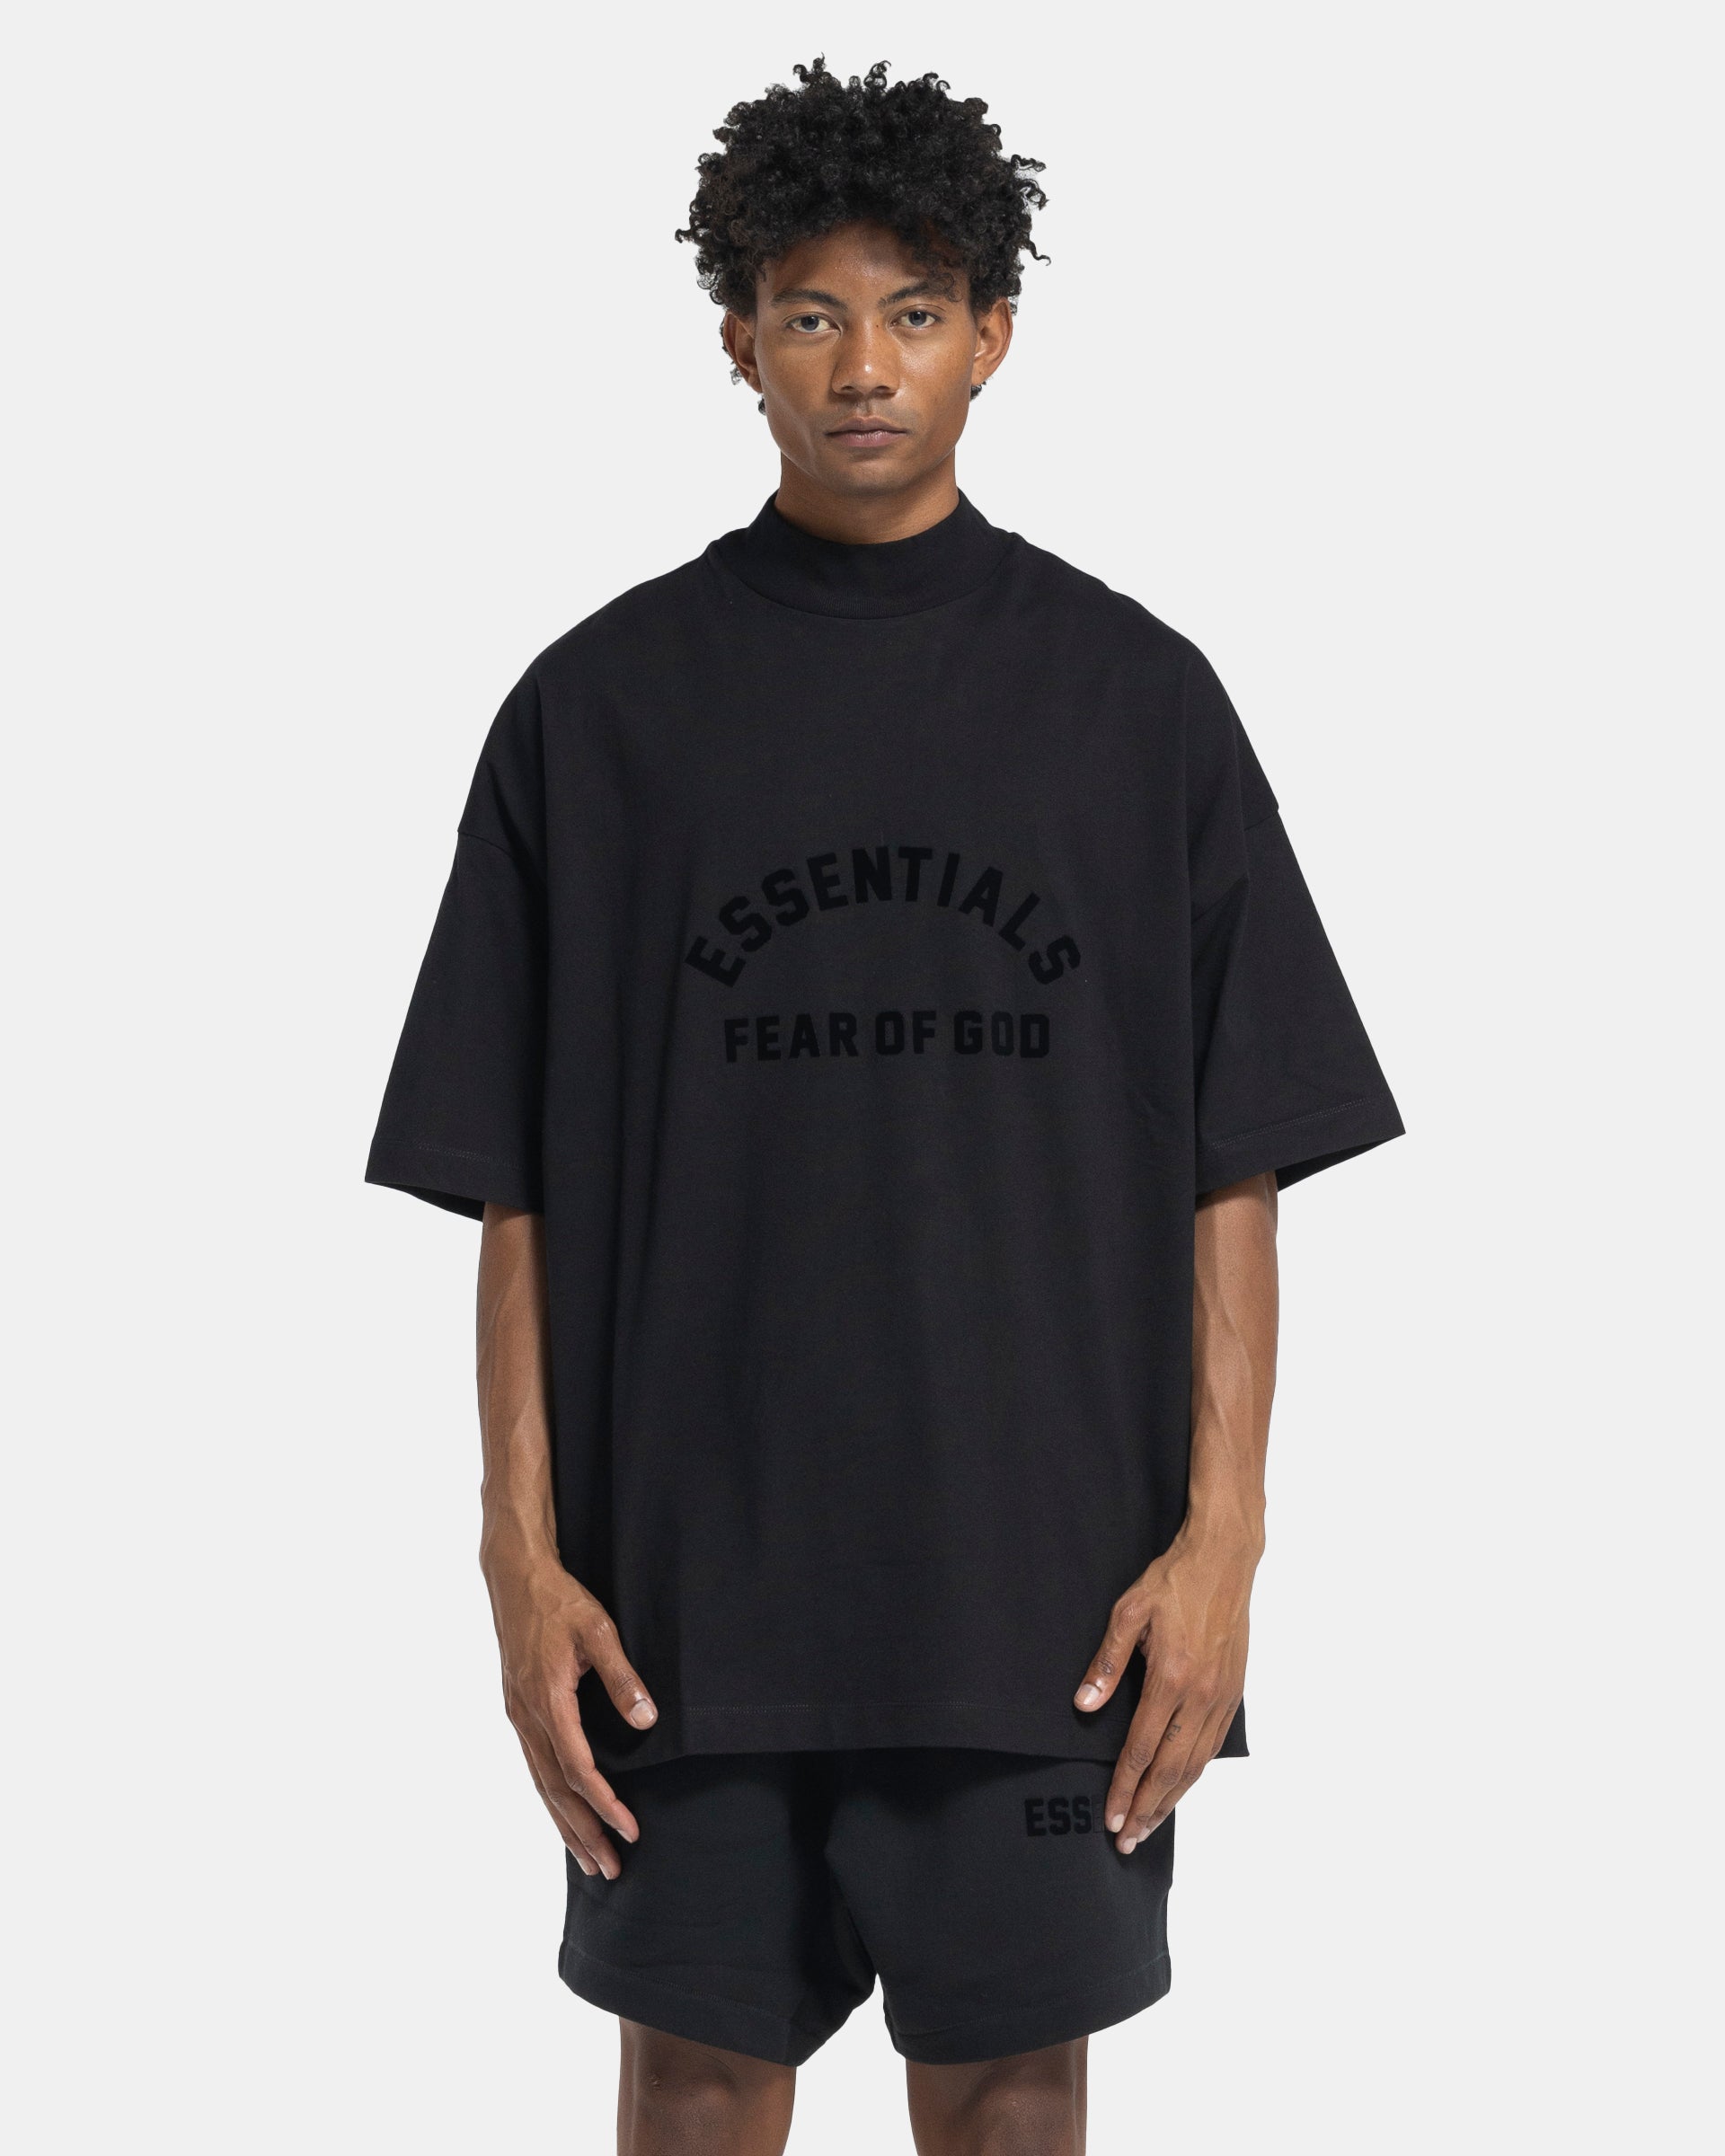 Fear of God Essentials SS22 Collection